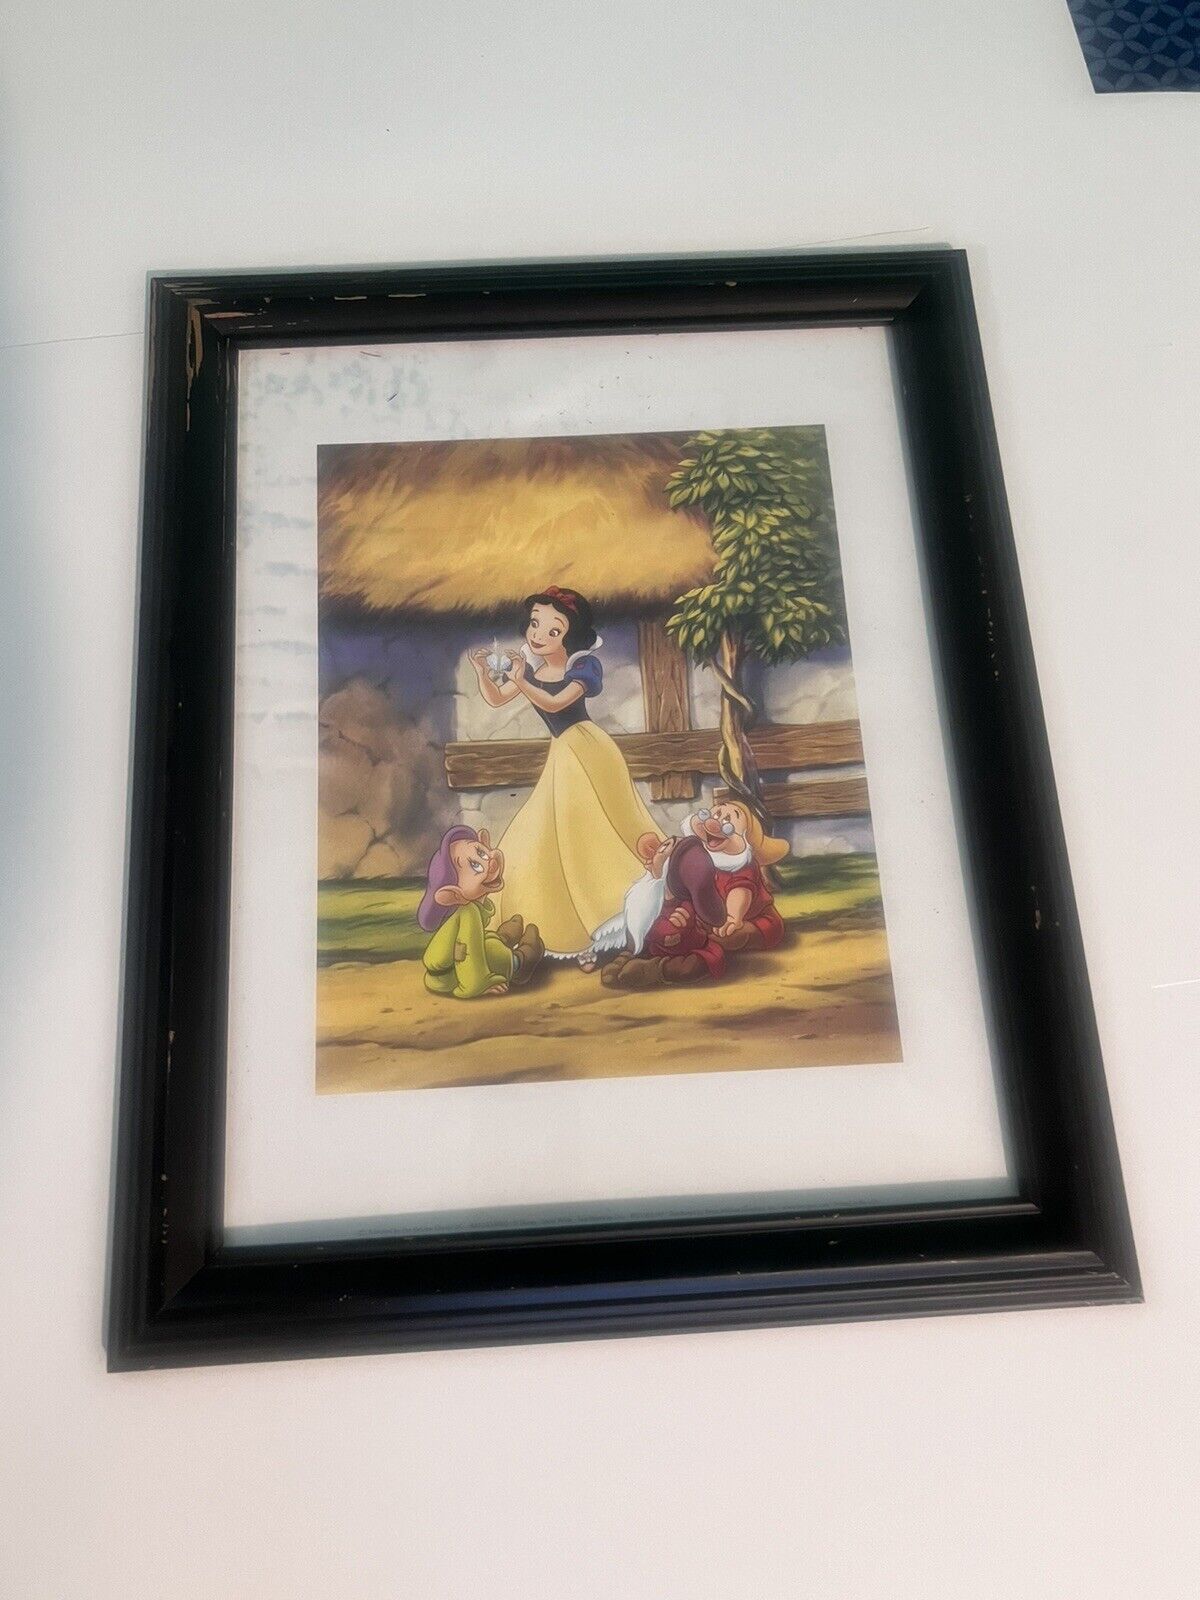 DISNEY SNOW WHITE FRAMED/Matted lithograph 12 x 14.5